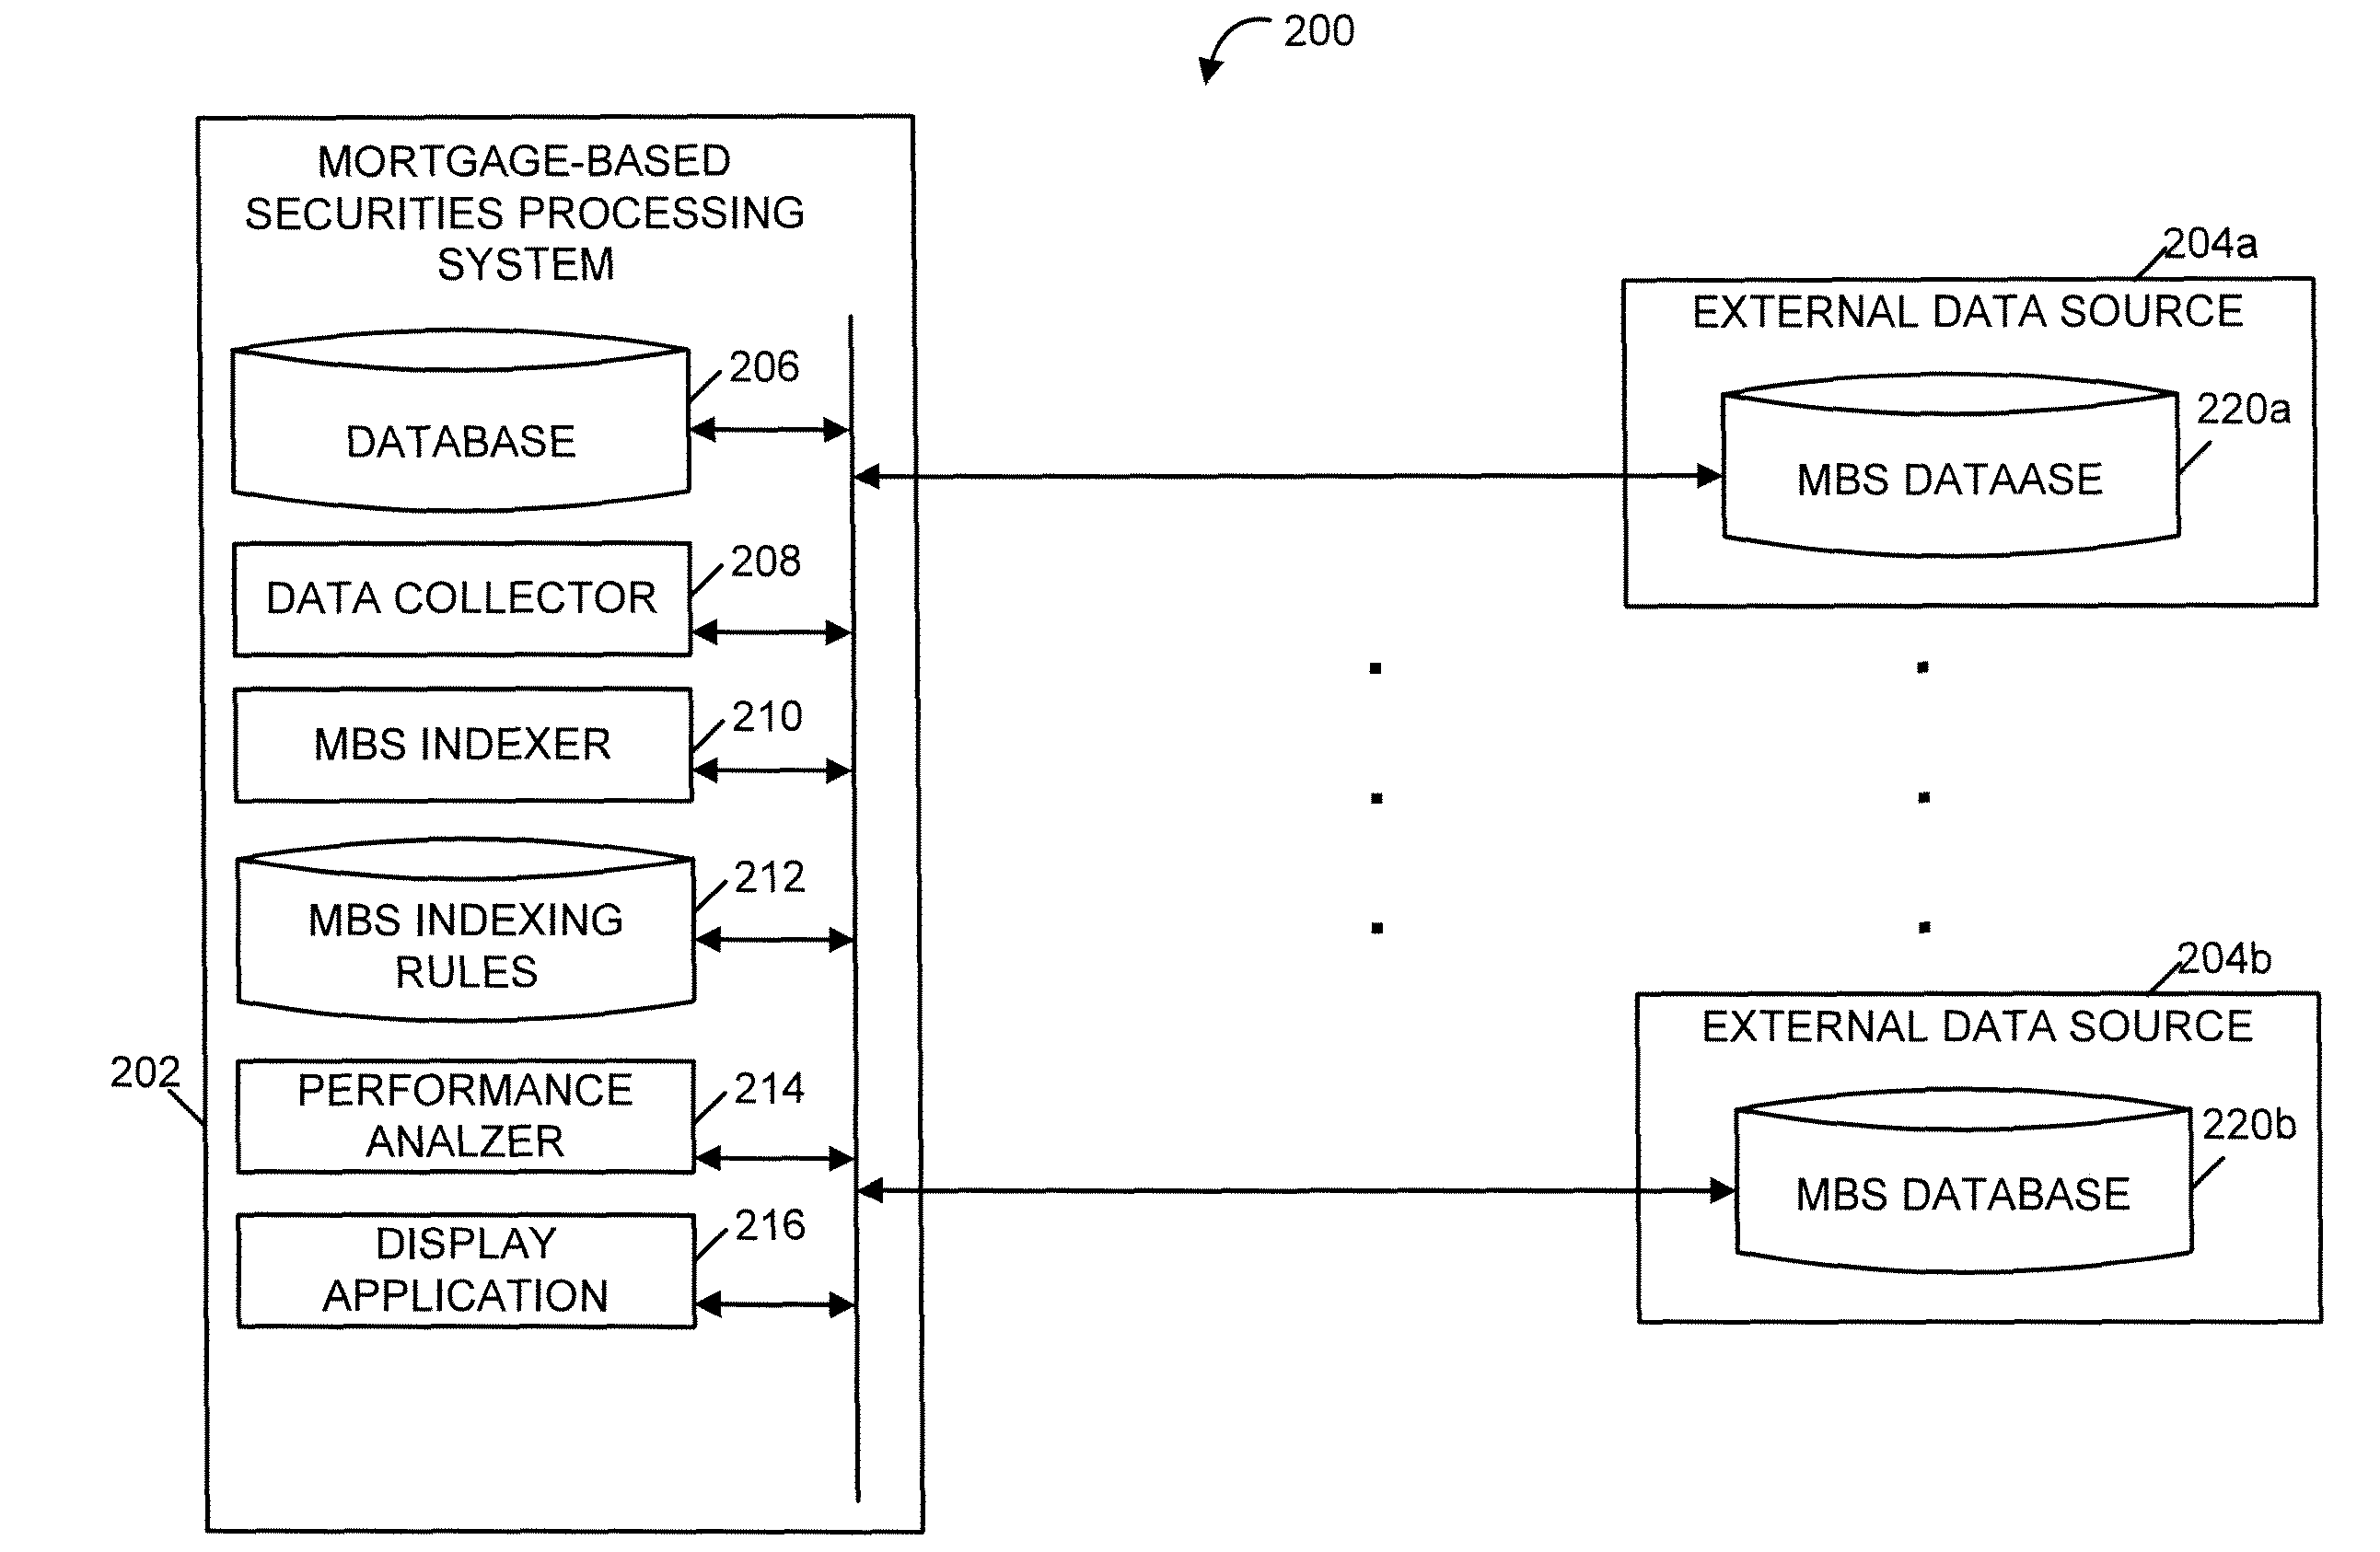 Method and System for Electronically Processing Mortgage-Backed Securities